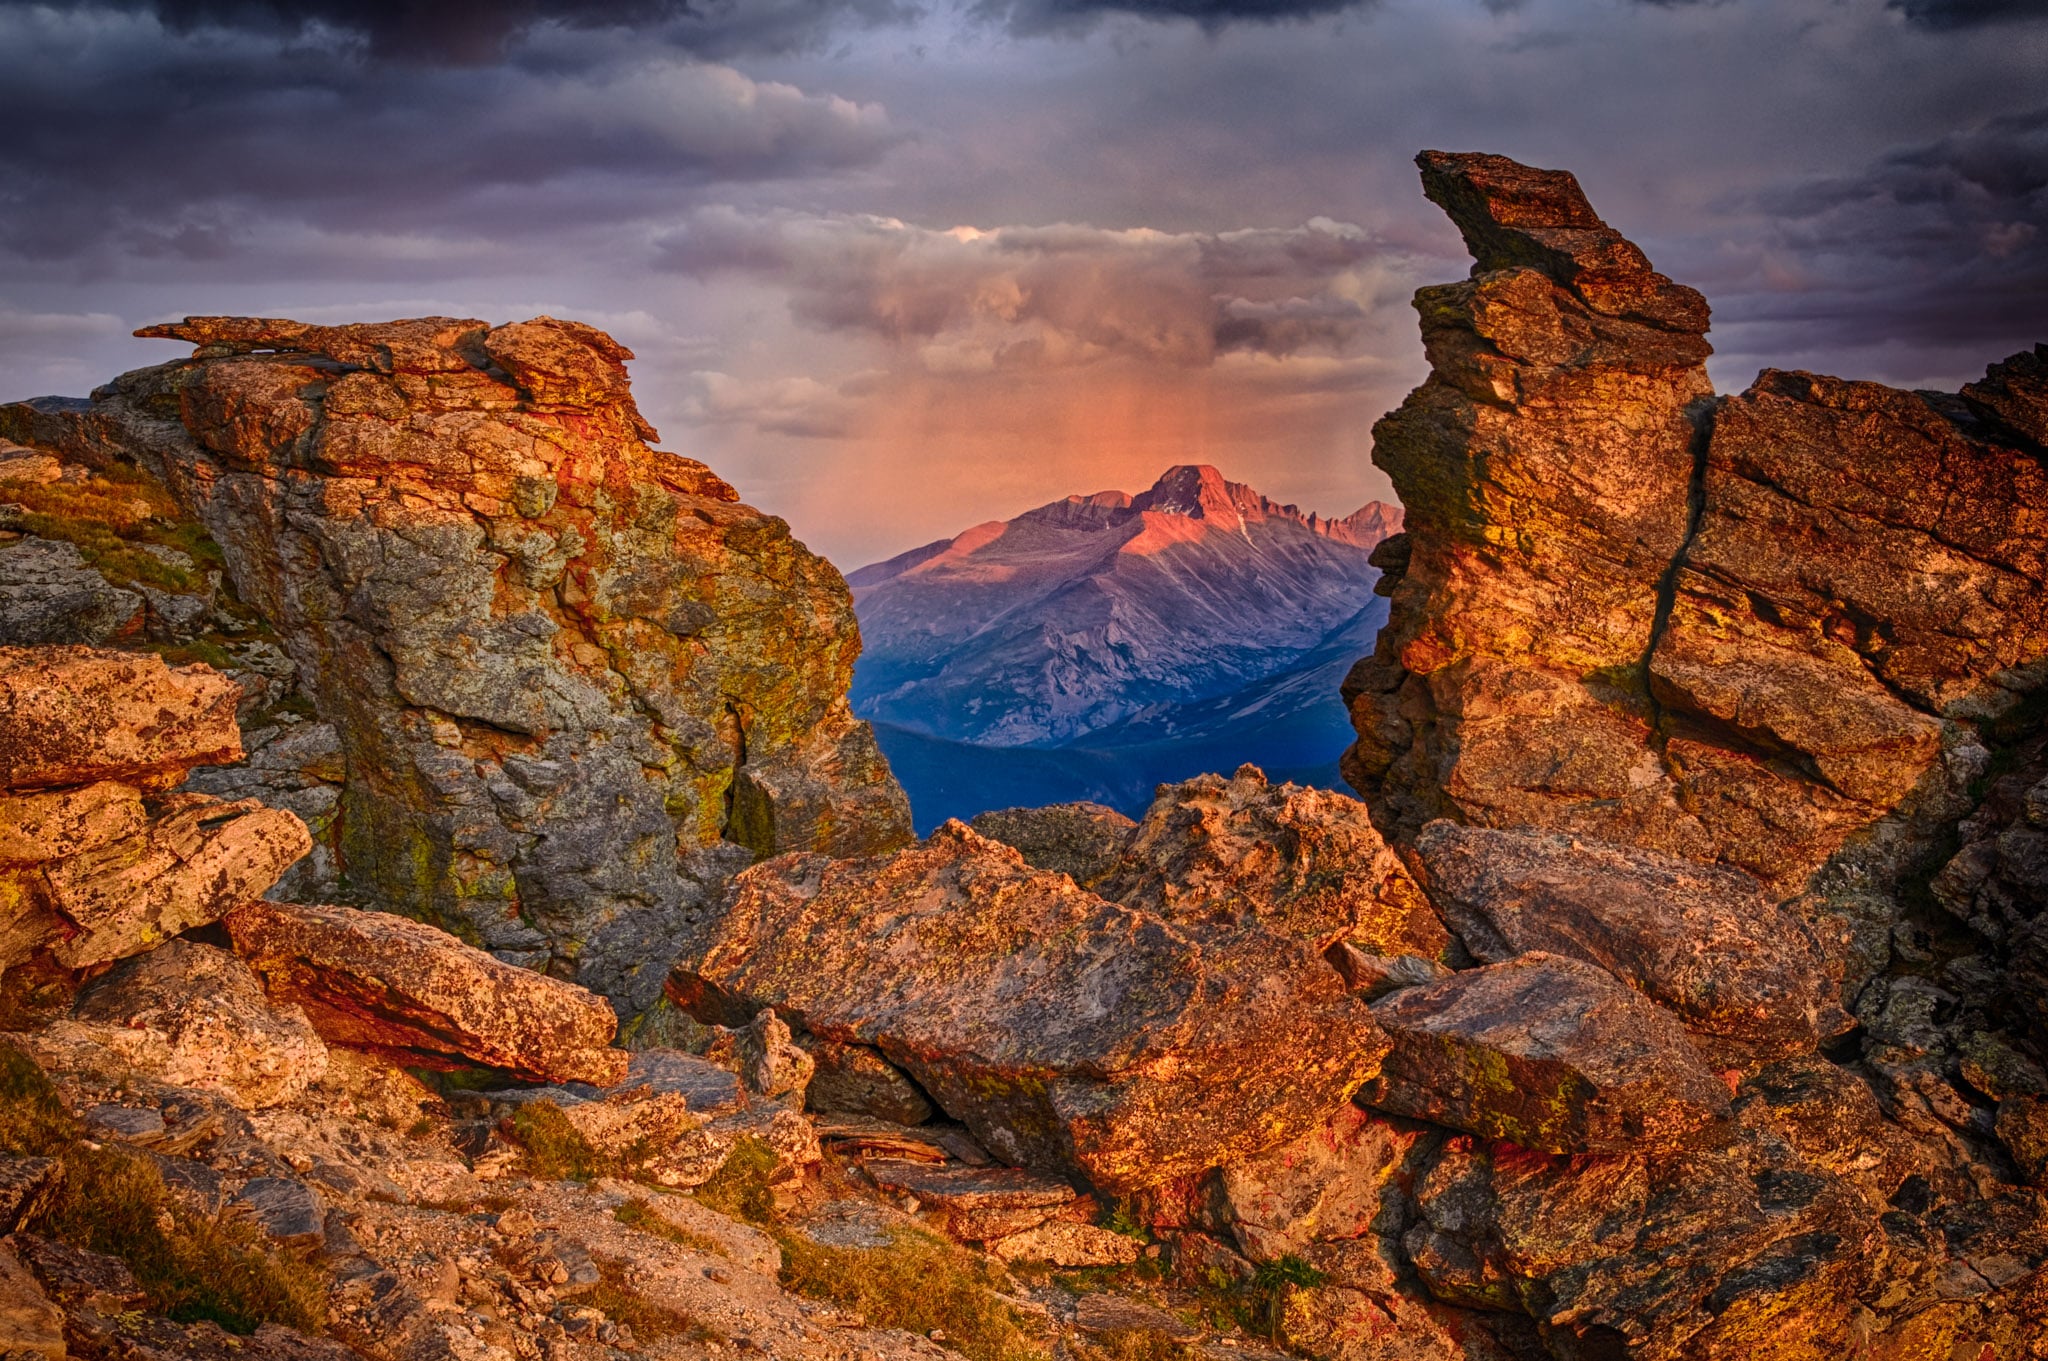 Sunset on Longs Peak as seen through the notch at Rock Cut on the Trail Ridge Road in Rocky Mountain National Park.